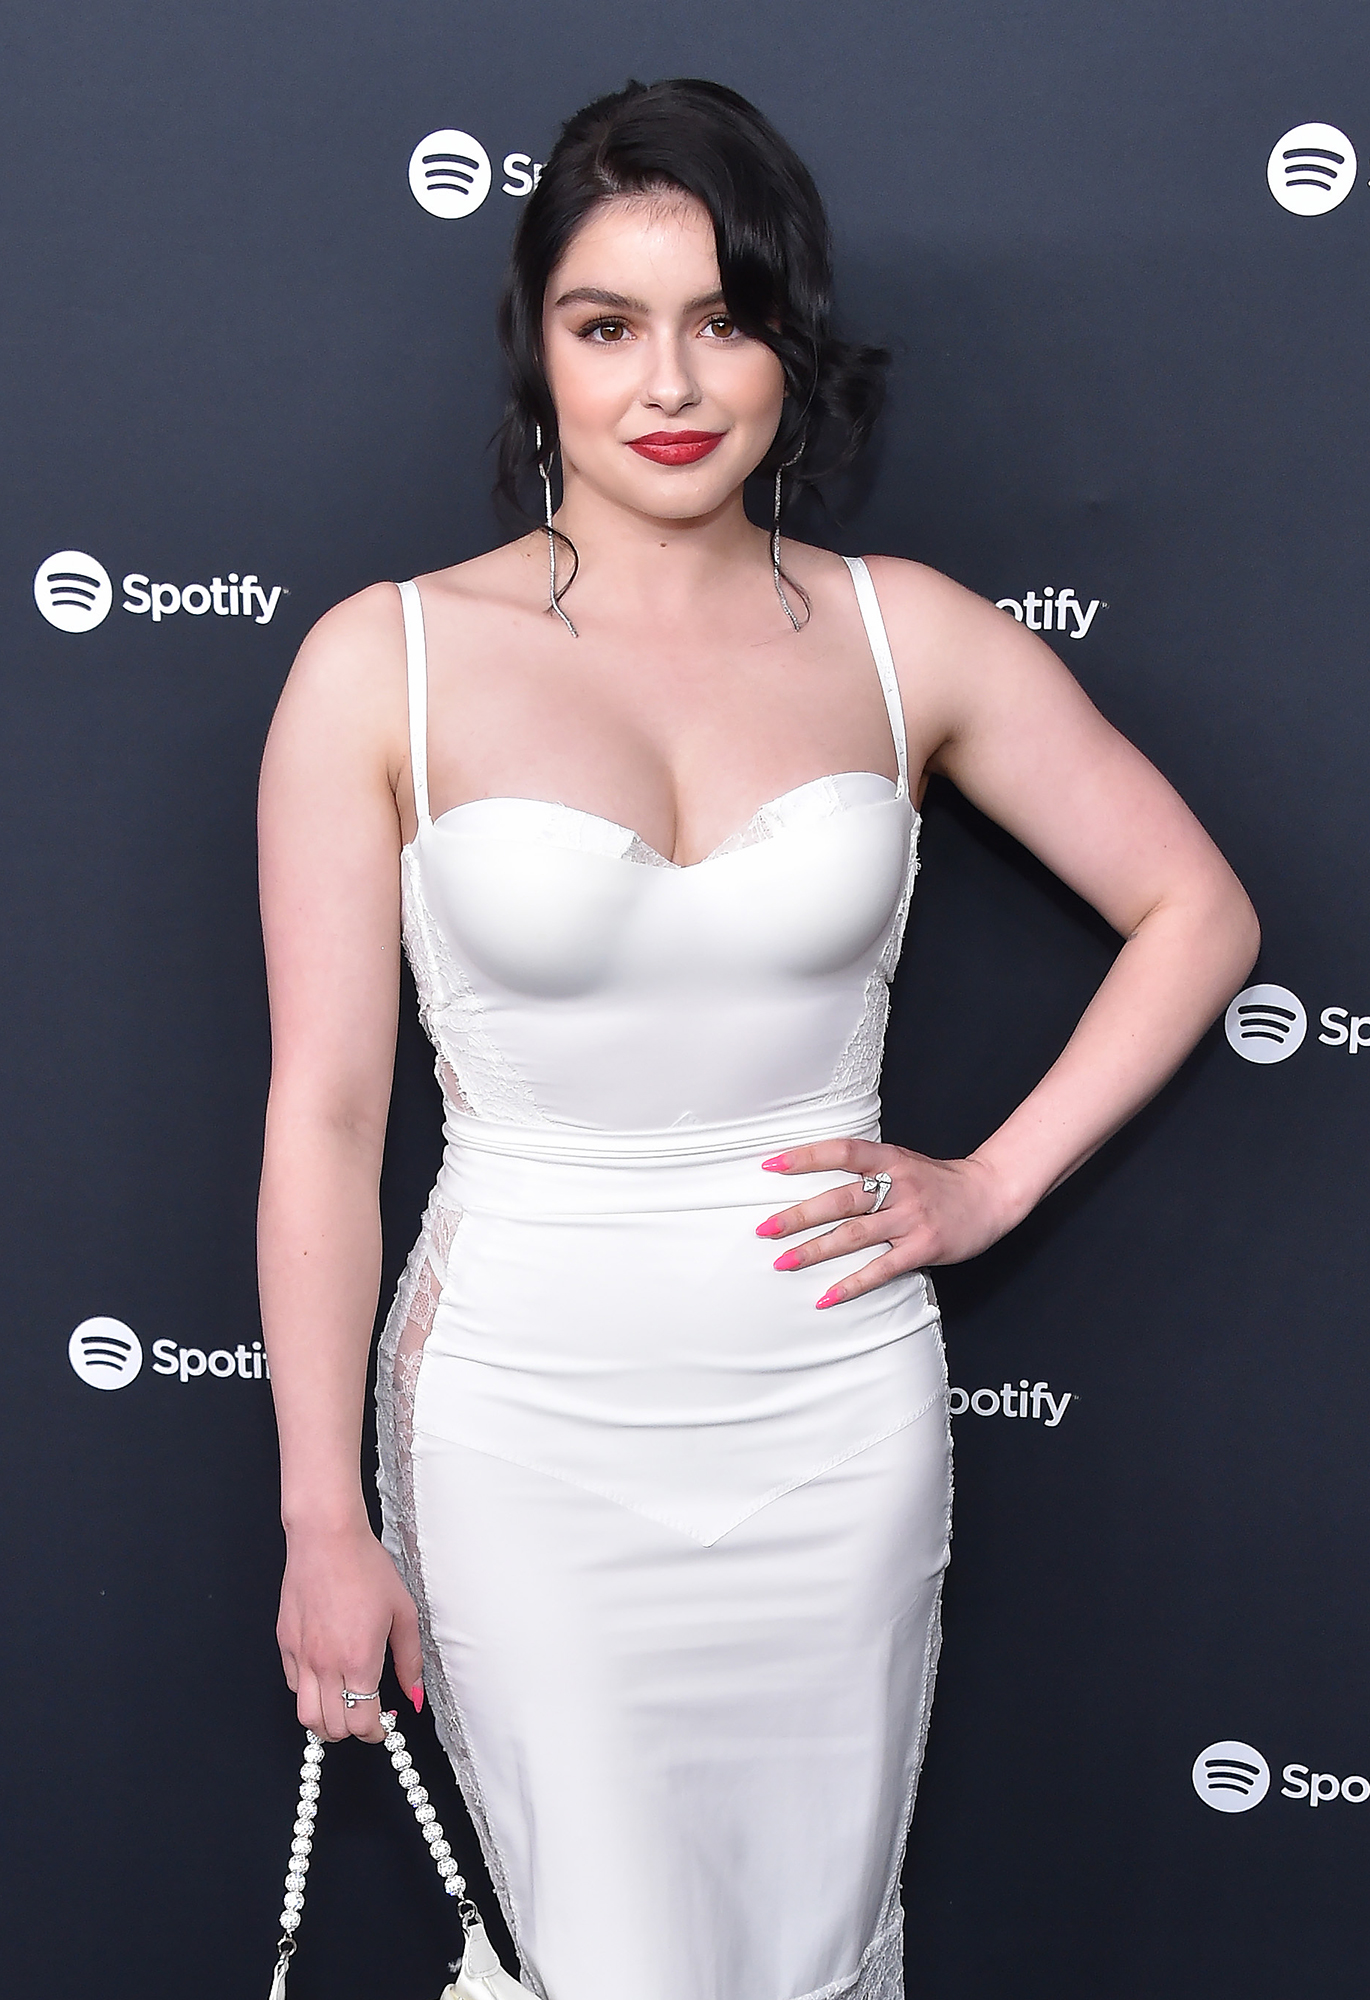 Ariel Winter Through The Years: 'Modern Family' And More